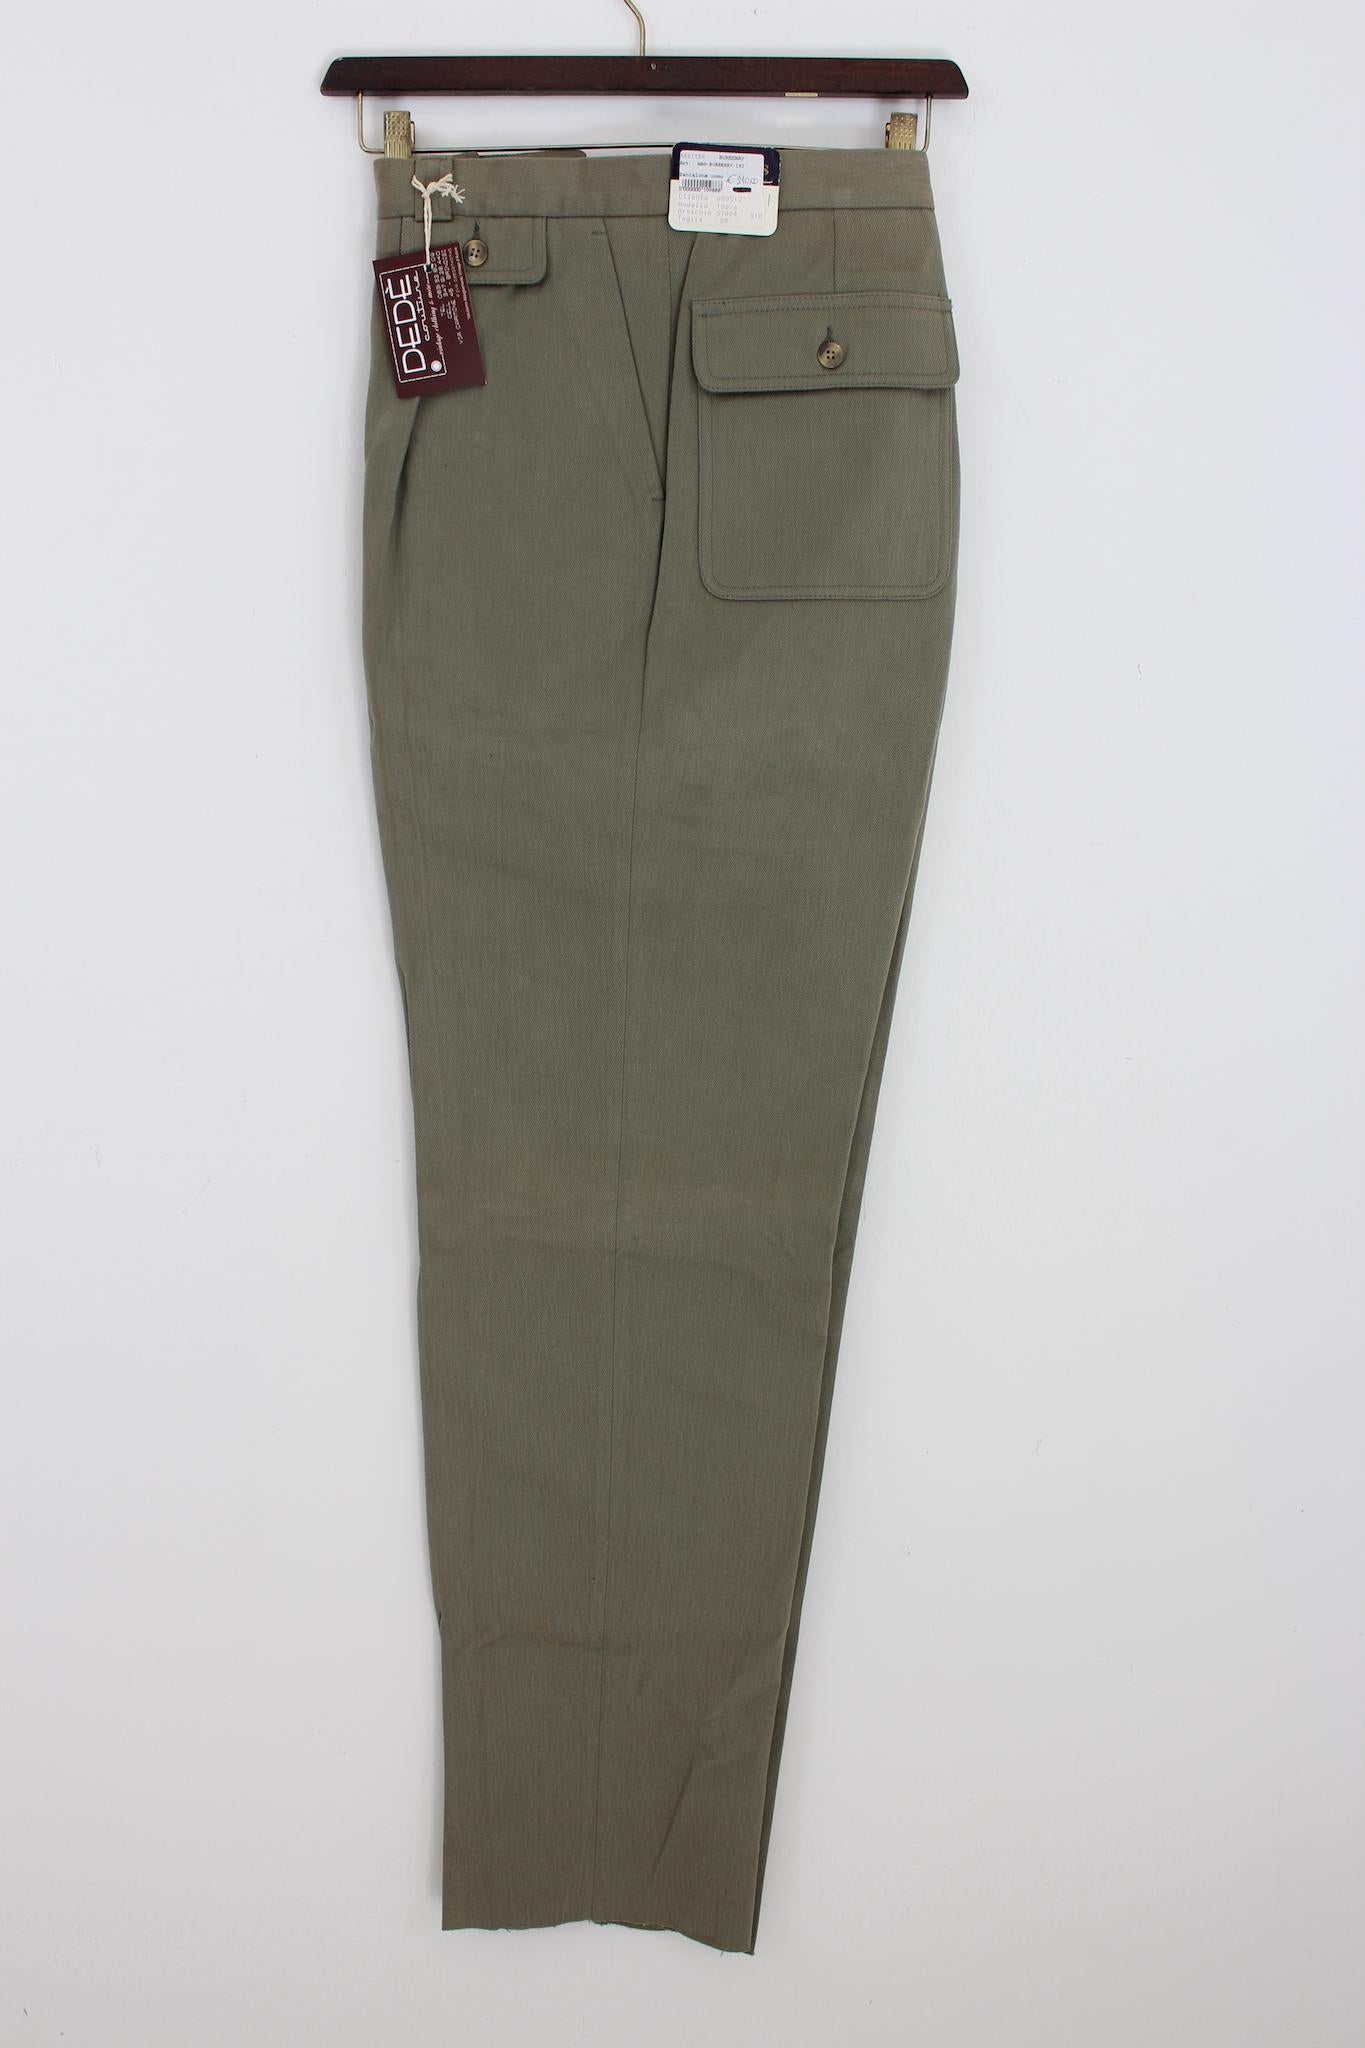 Burberry 90s vintage classic trousers. Straight leg model, light green color, 100% cotton fabric. Made in Italy. New with tag, coming from warehouse stock.

Size: 58 It 48 Us 48 Uk

Waist: 50 cm
Length: 122 cm
Hem: 23 cm